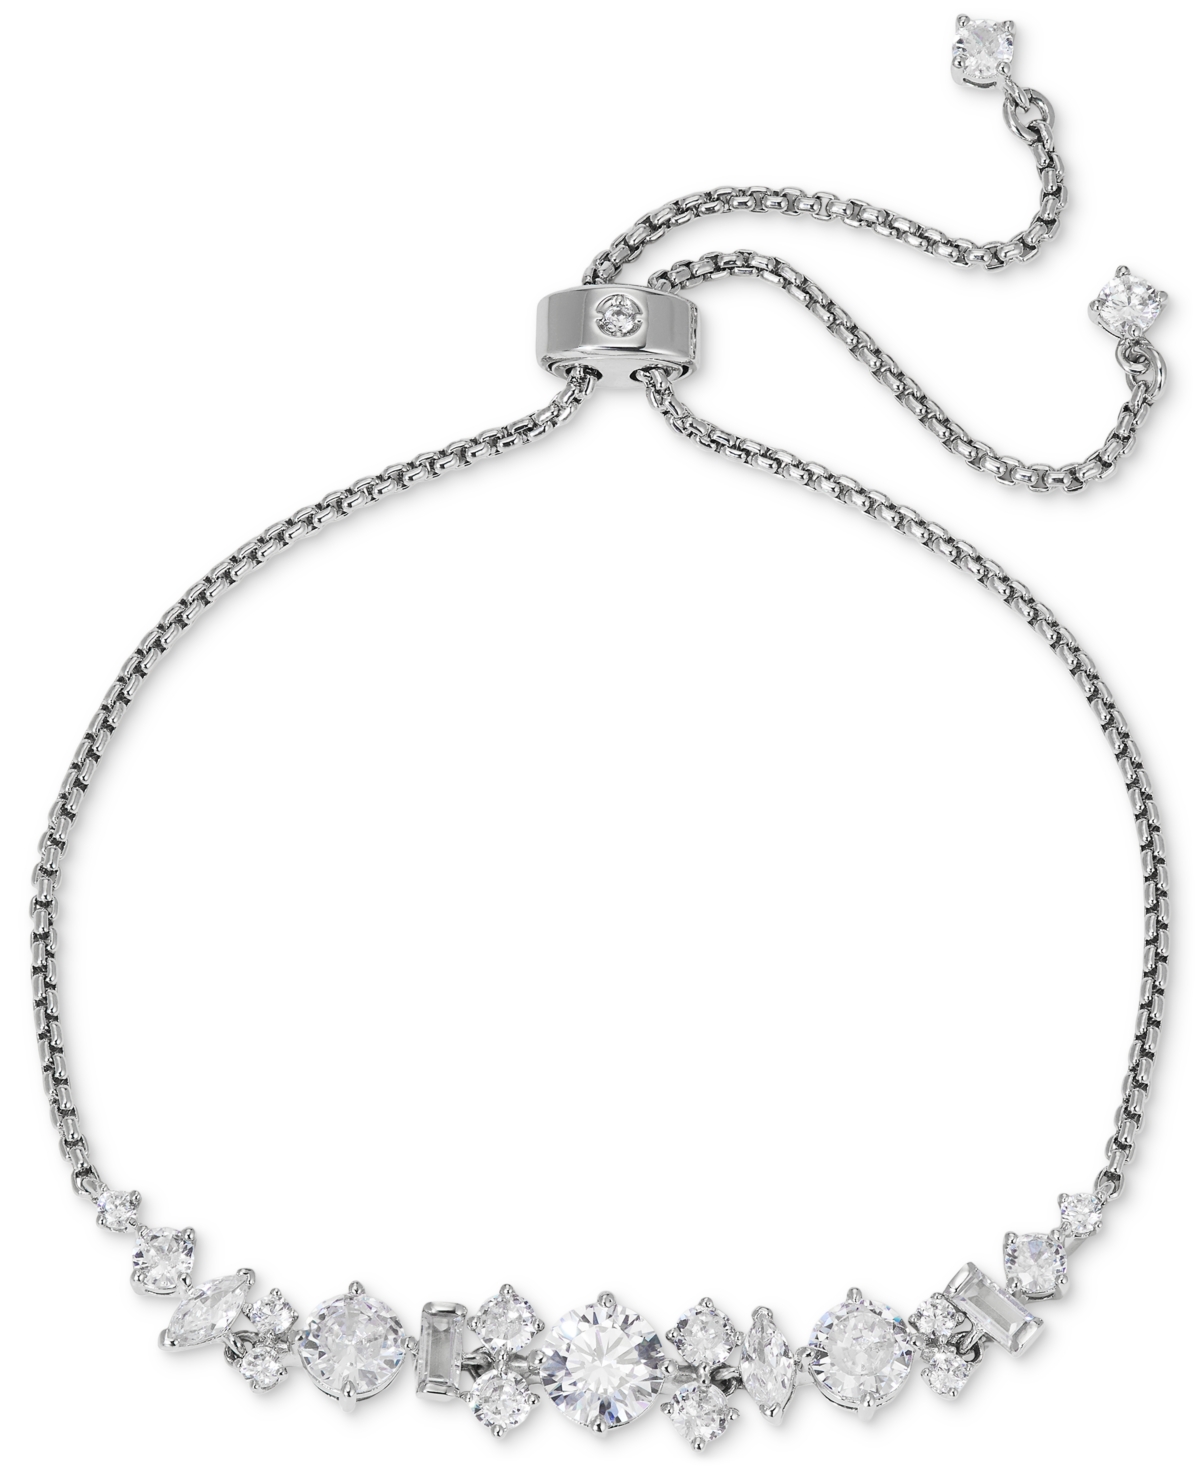 Silver-Tone Mixed Cubic Zirconia Cluster Slider Bracelet, Created for Macy's - Rhodium